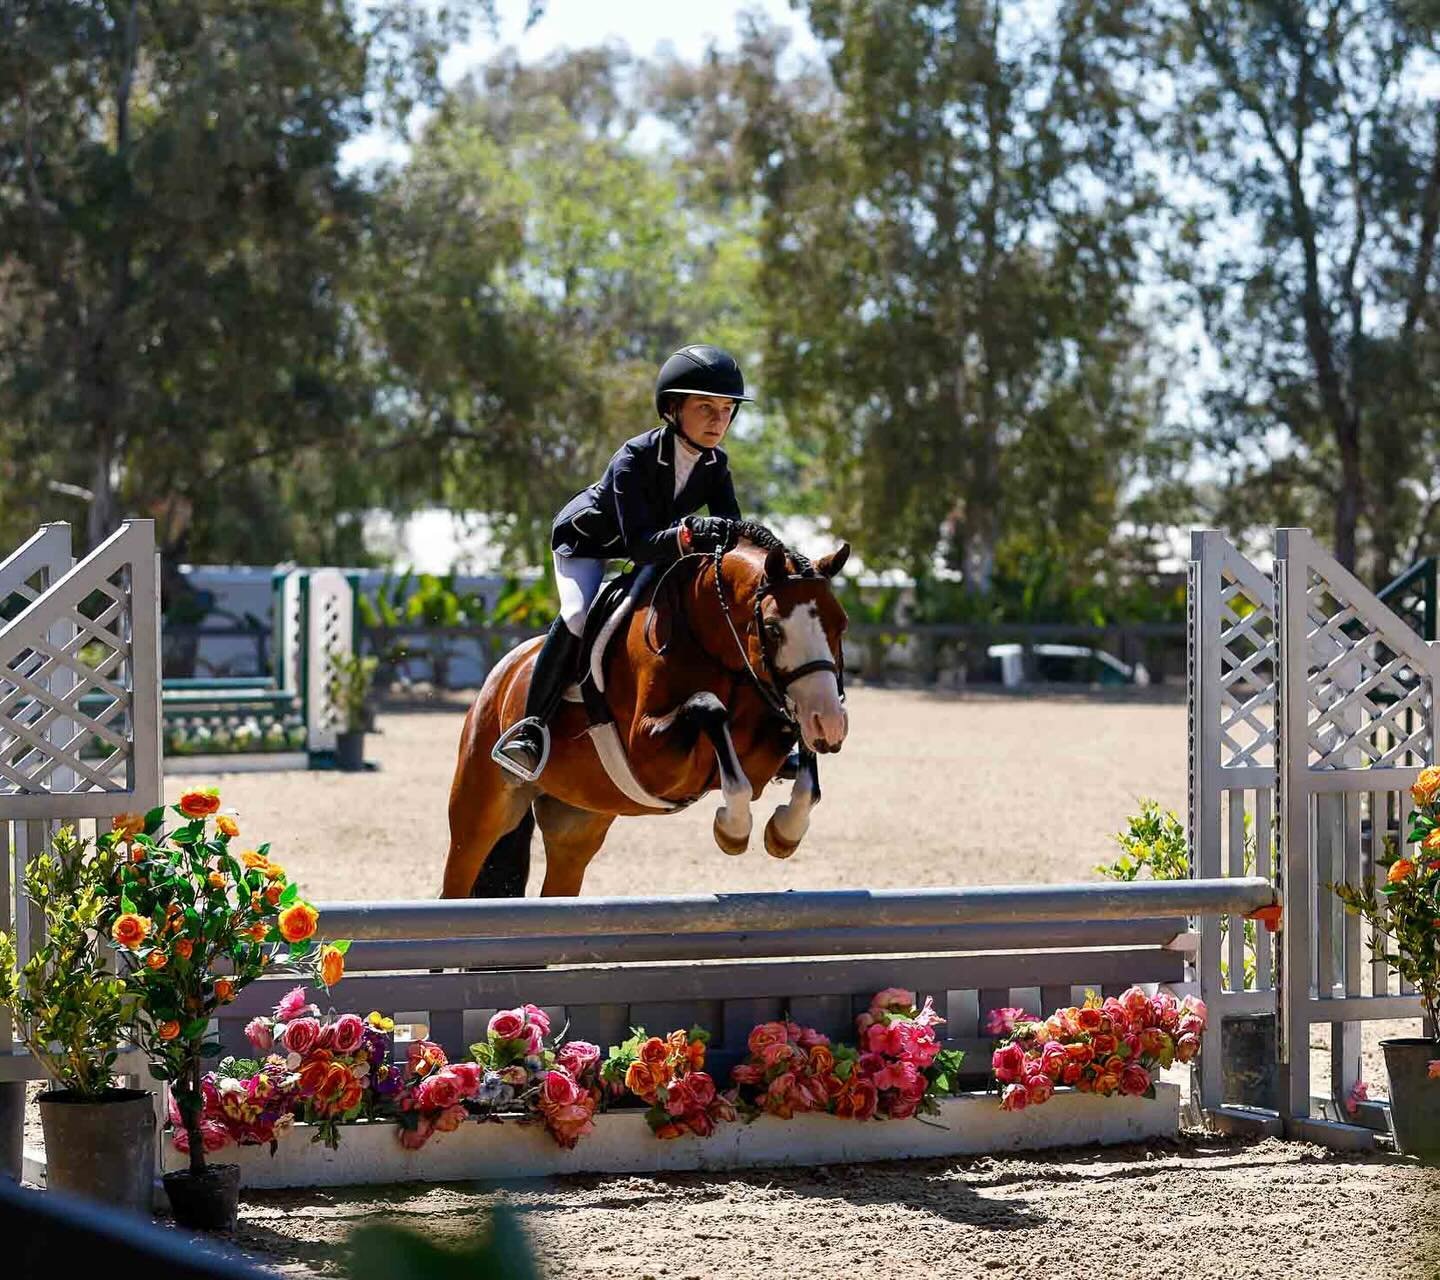 Congratulations to India Kulkin on a spectacular WCHR Week at Temecula Valley National Premier 1🏆

🌟Children&rsquo;s Hunter 13/u Champion on Big Business as well as taking the blue in the second round of the 2&rsquo;9 Modified on Friday
🌟Champion 